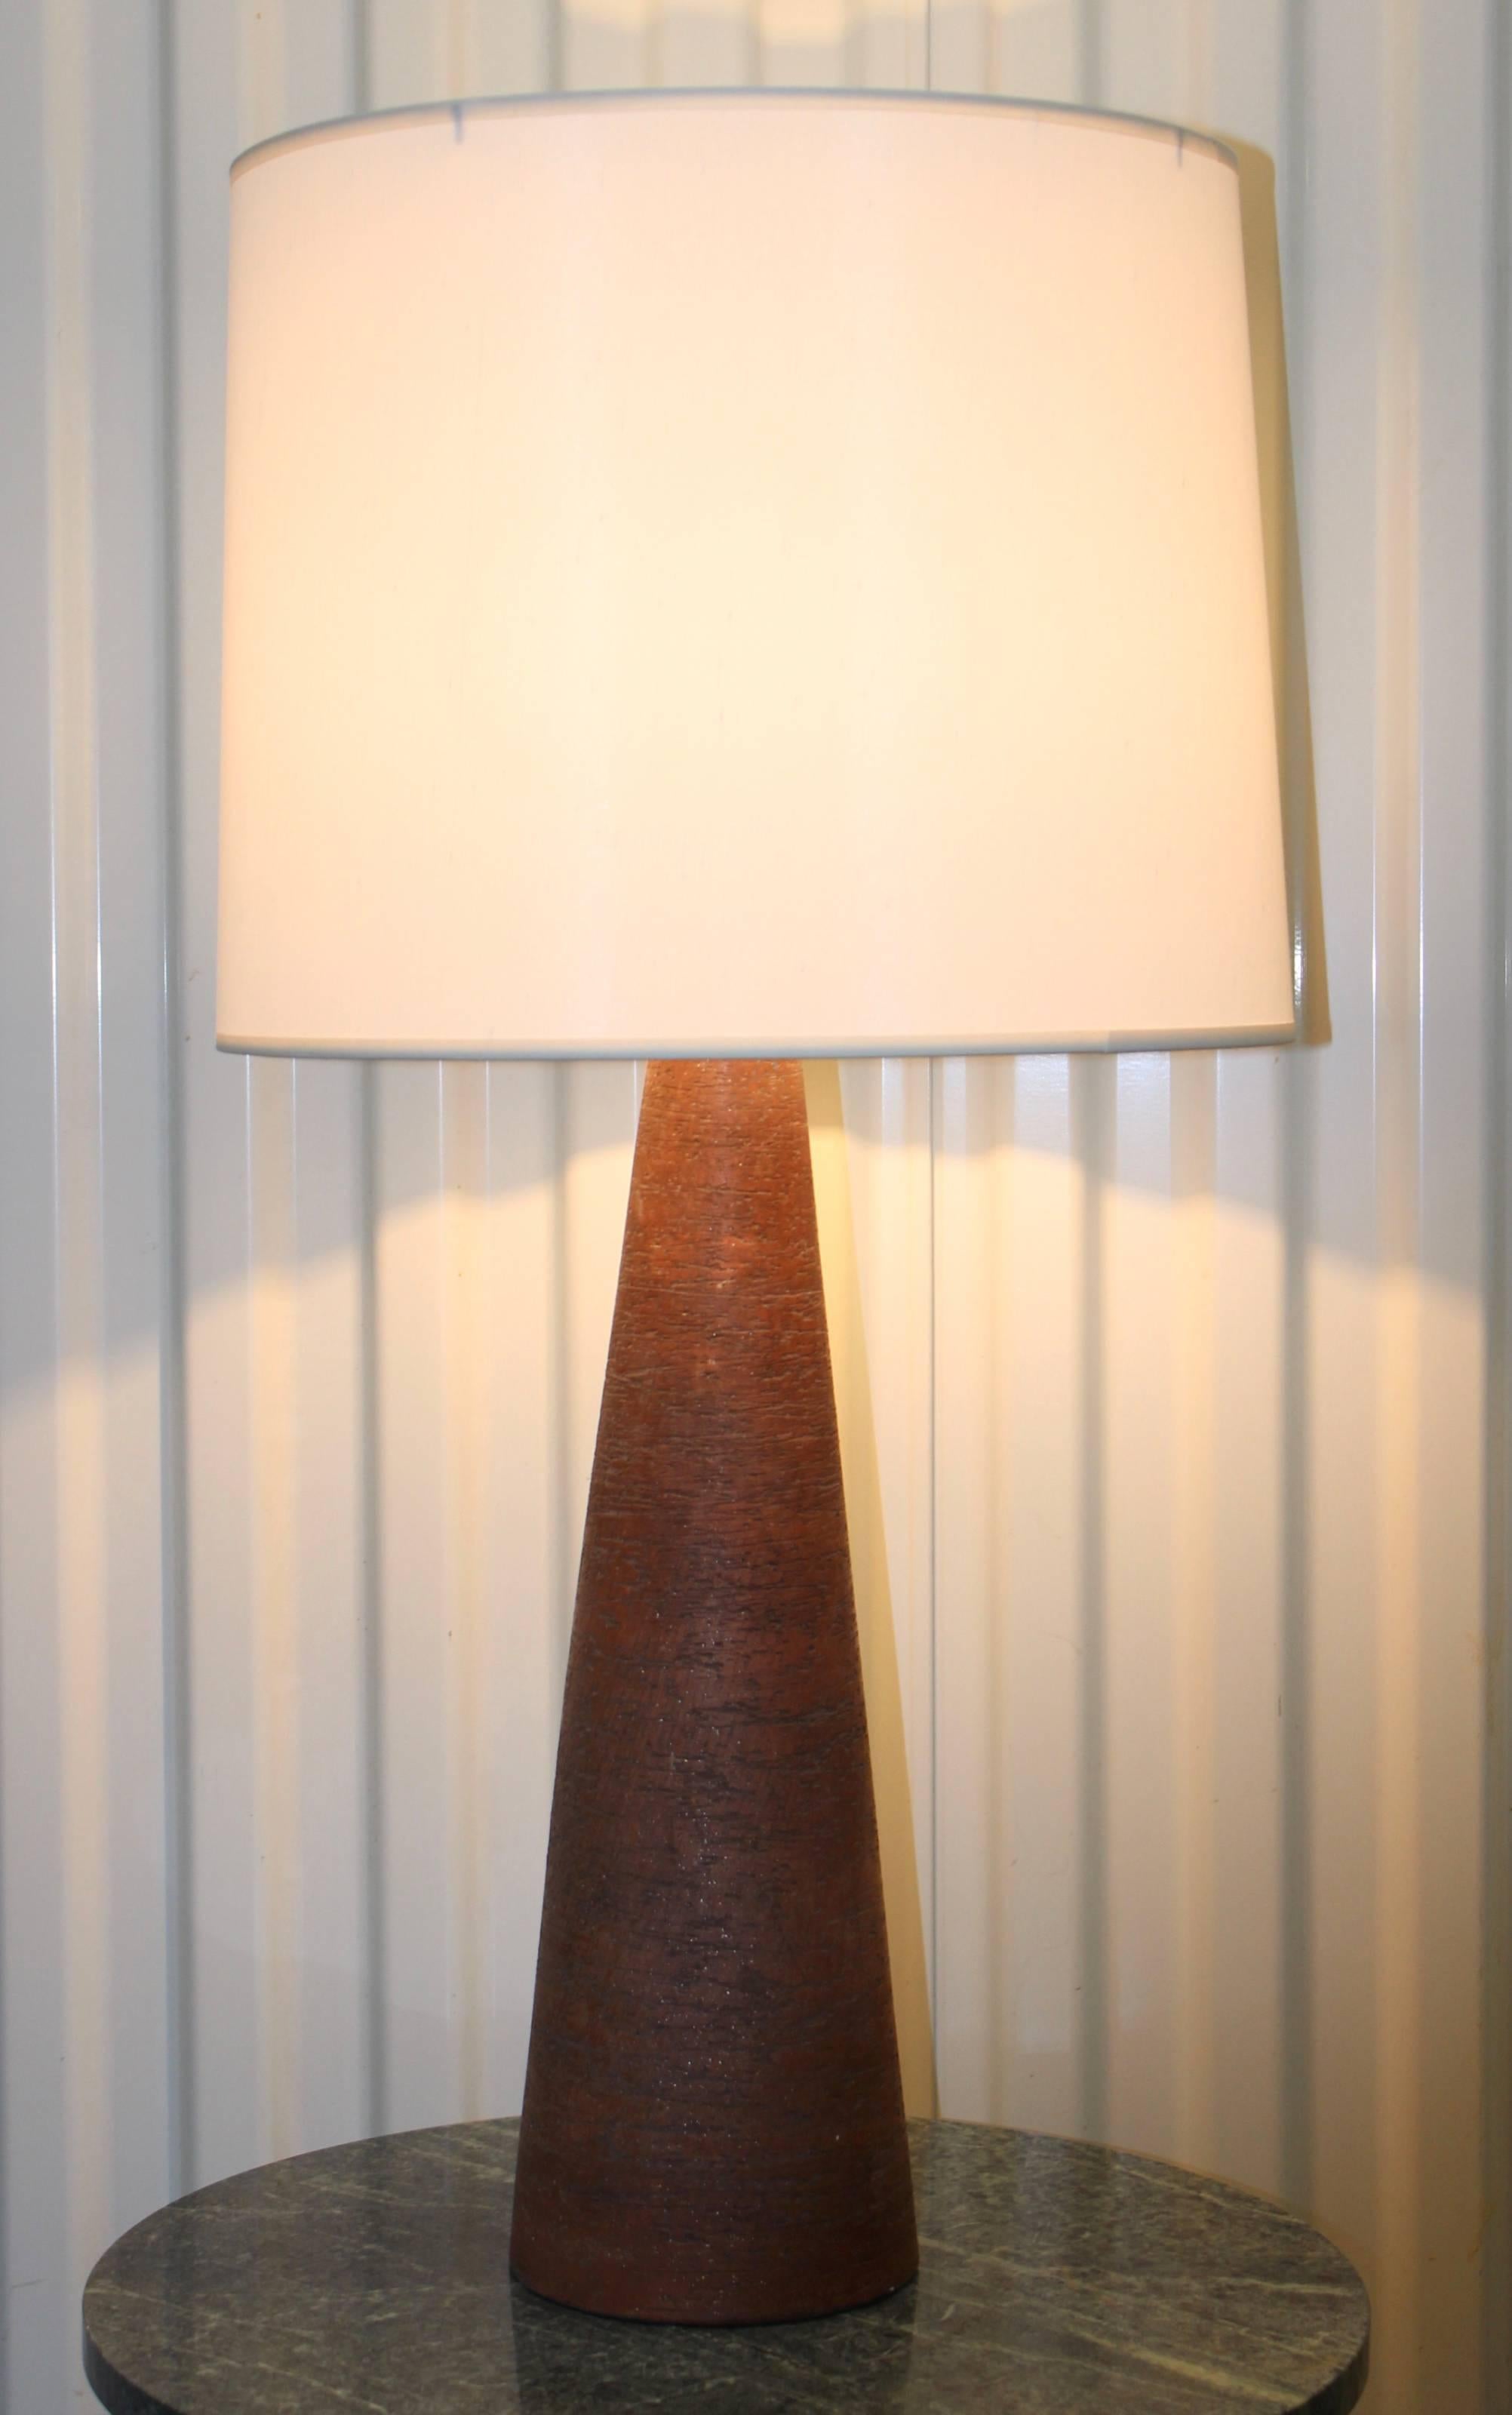 Stunning 1960s, Austrian terracotta table lamp with brass hardware.

Shade for photography only. 

Height to light socket 20.5''.